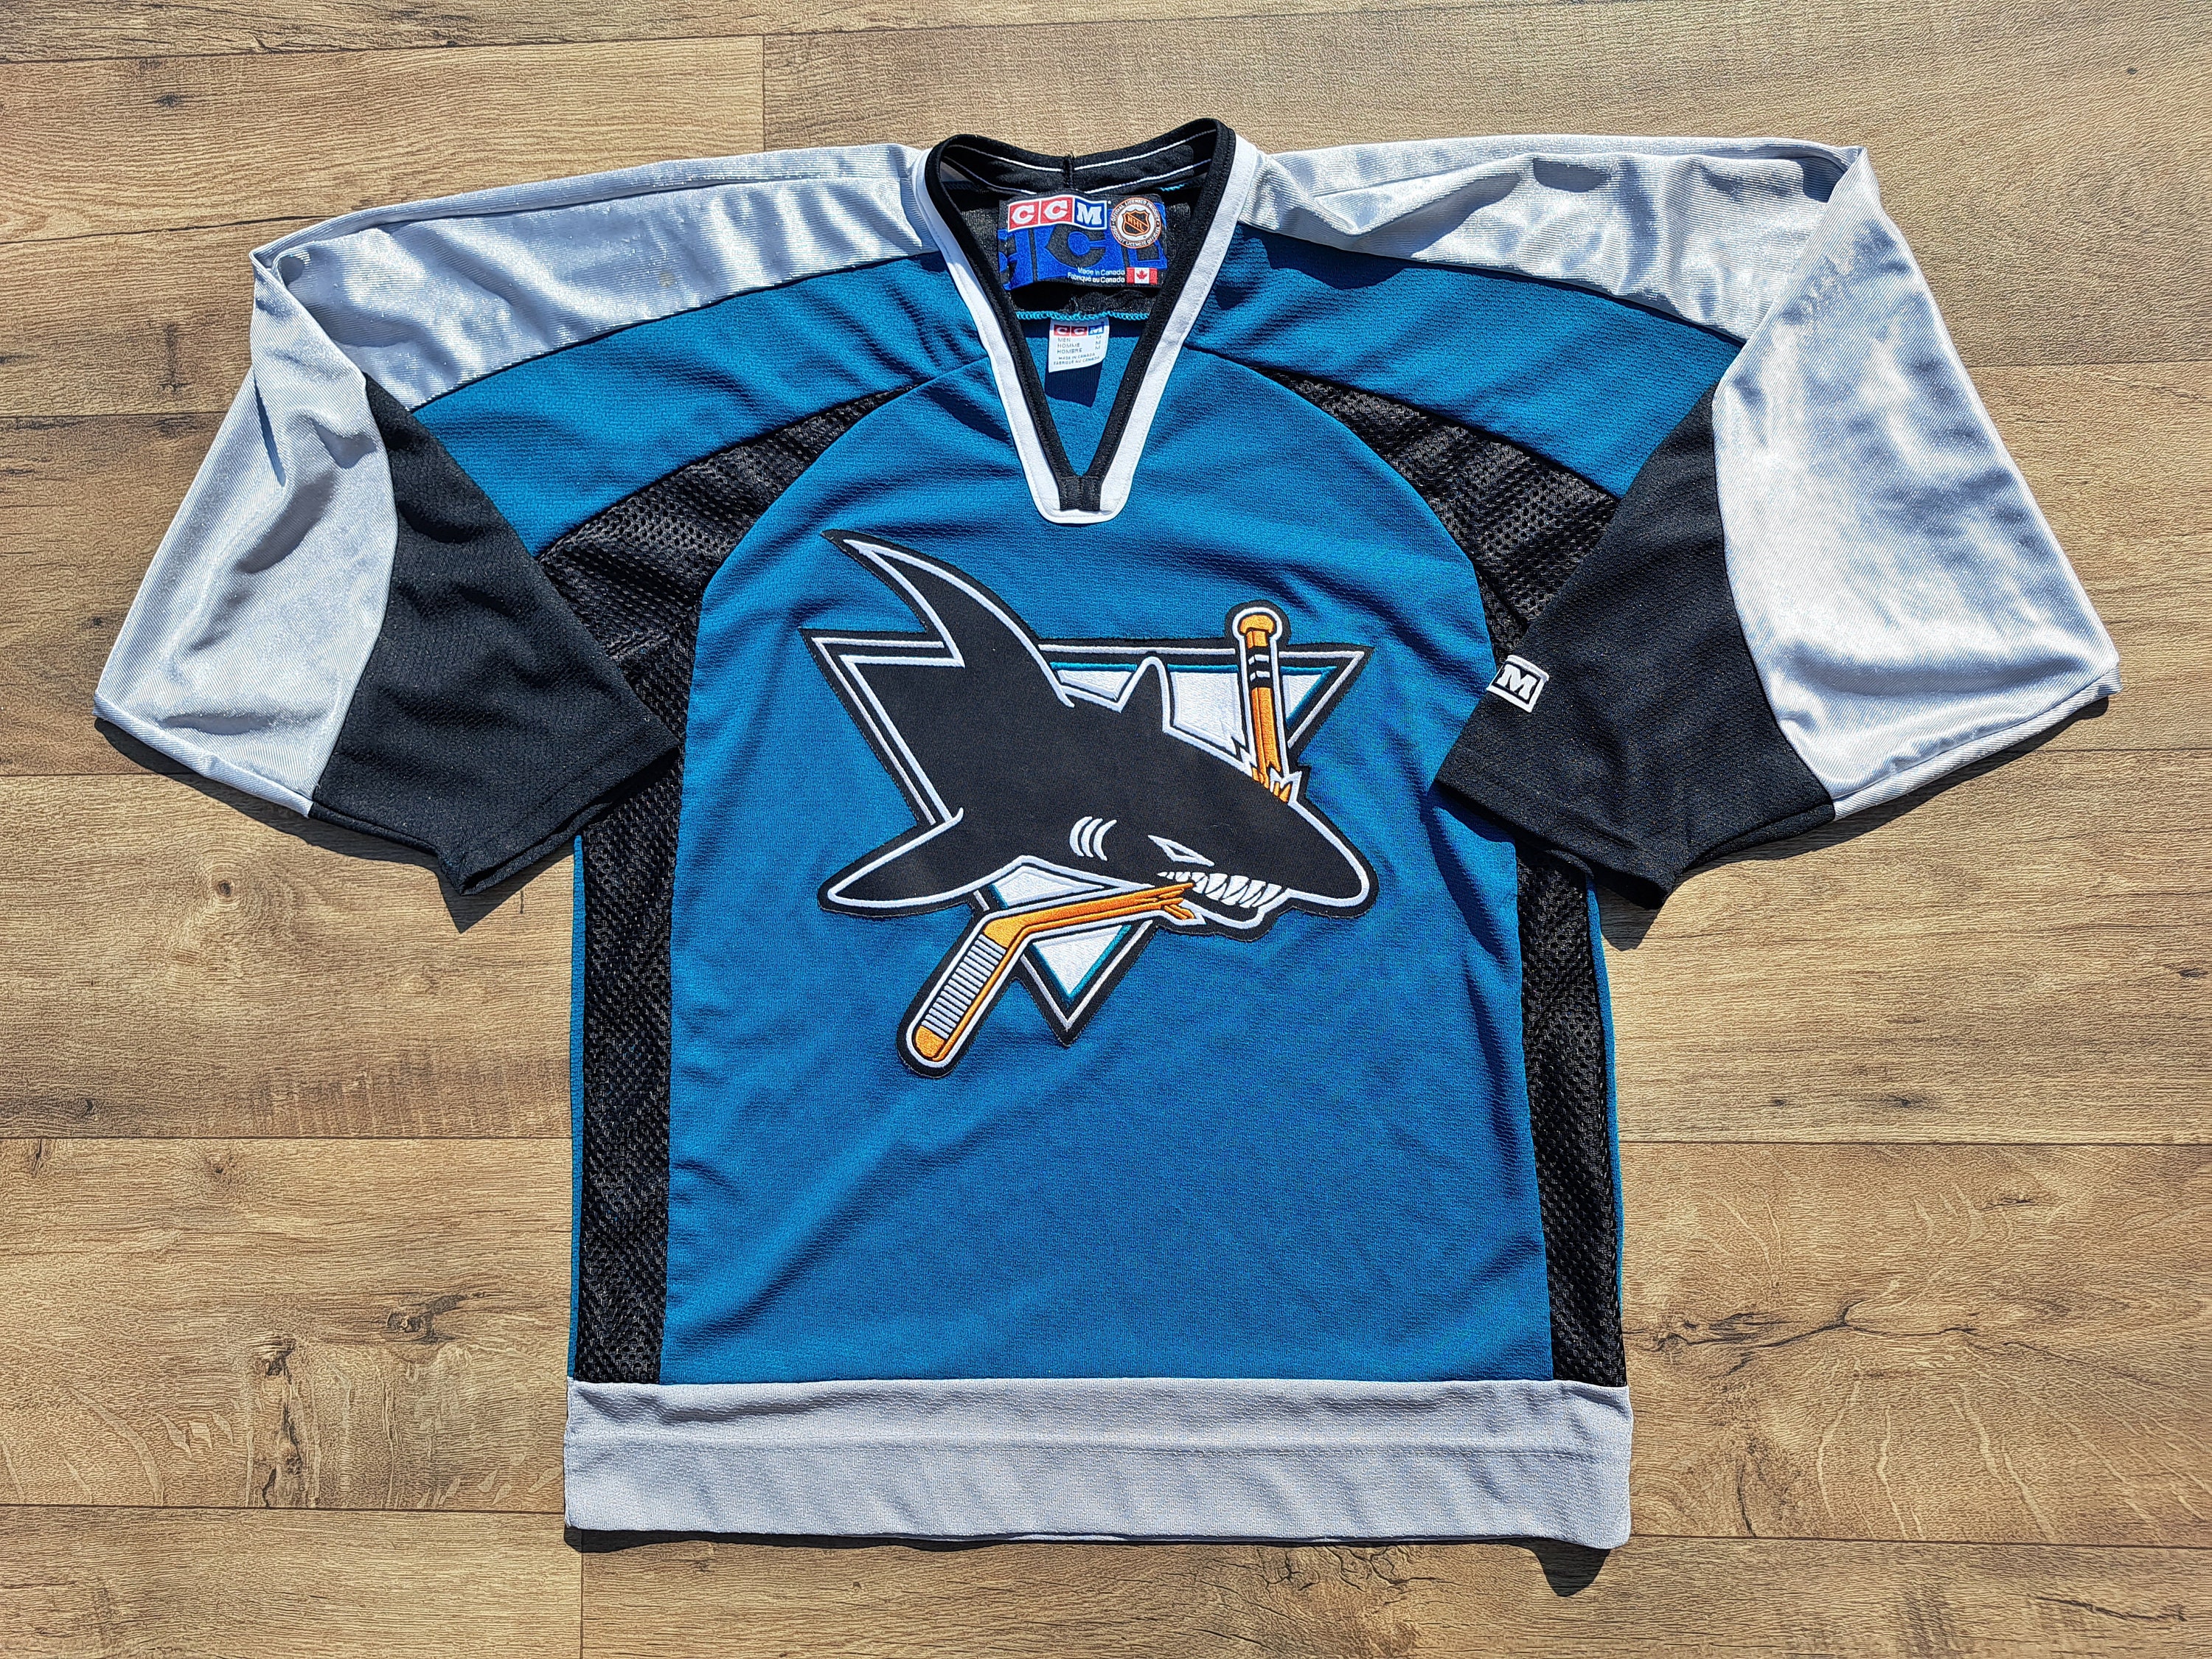 Vintage 90s San Jose Sharks NHL jersey. Made in Canada. Deadstock